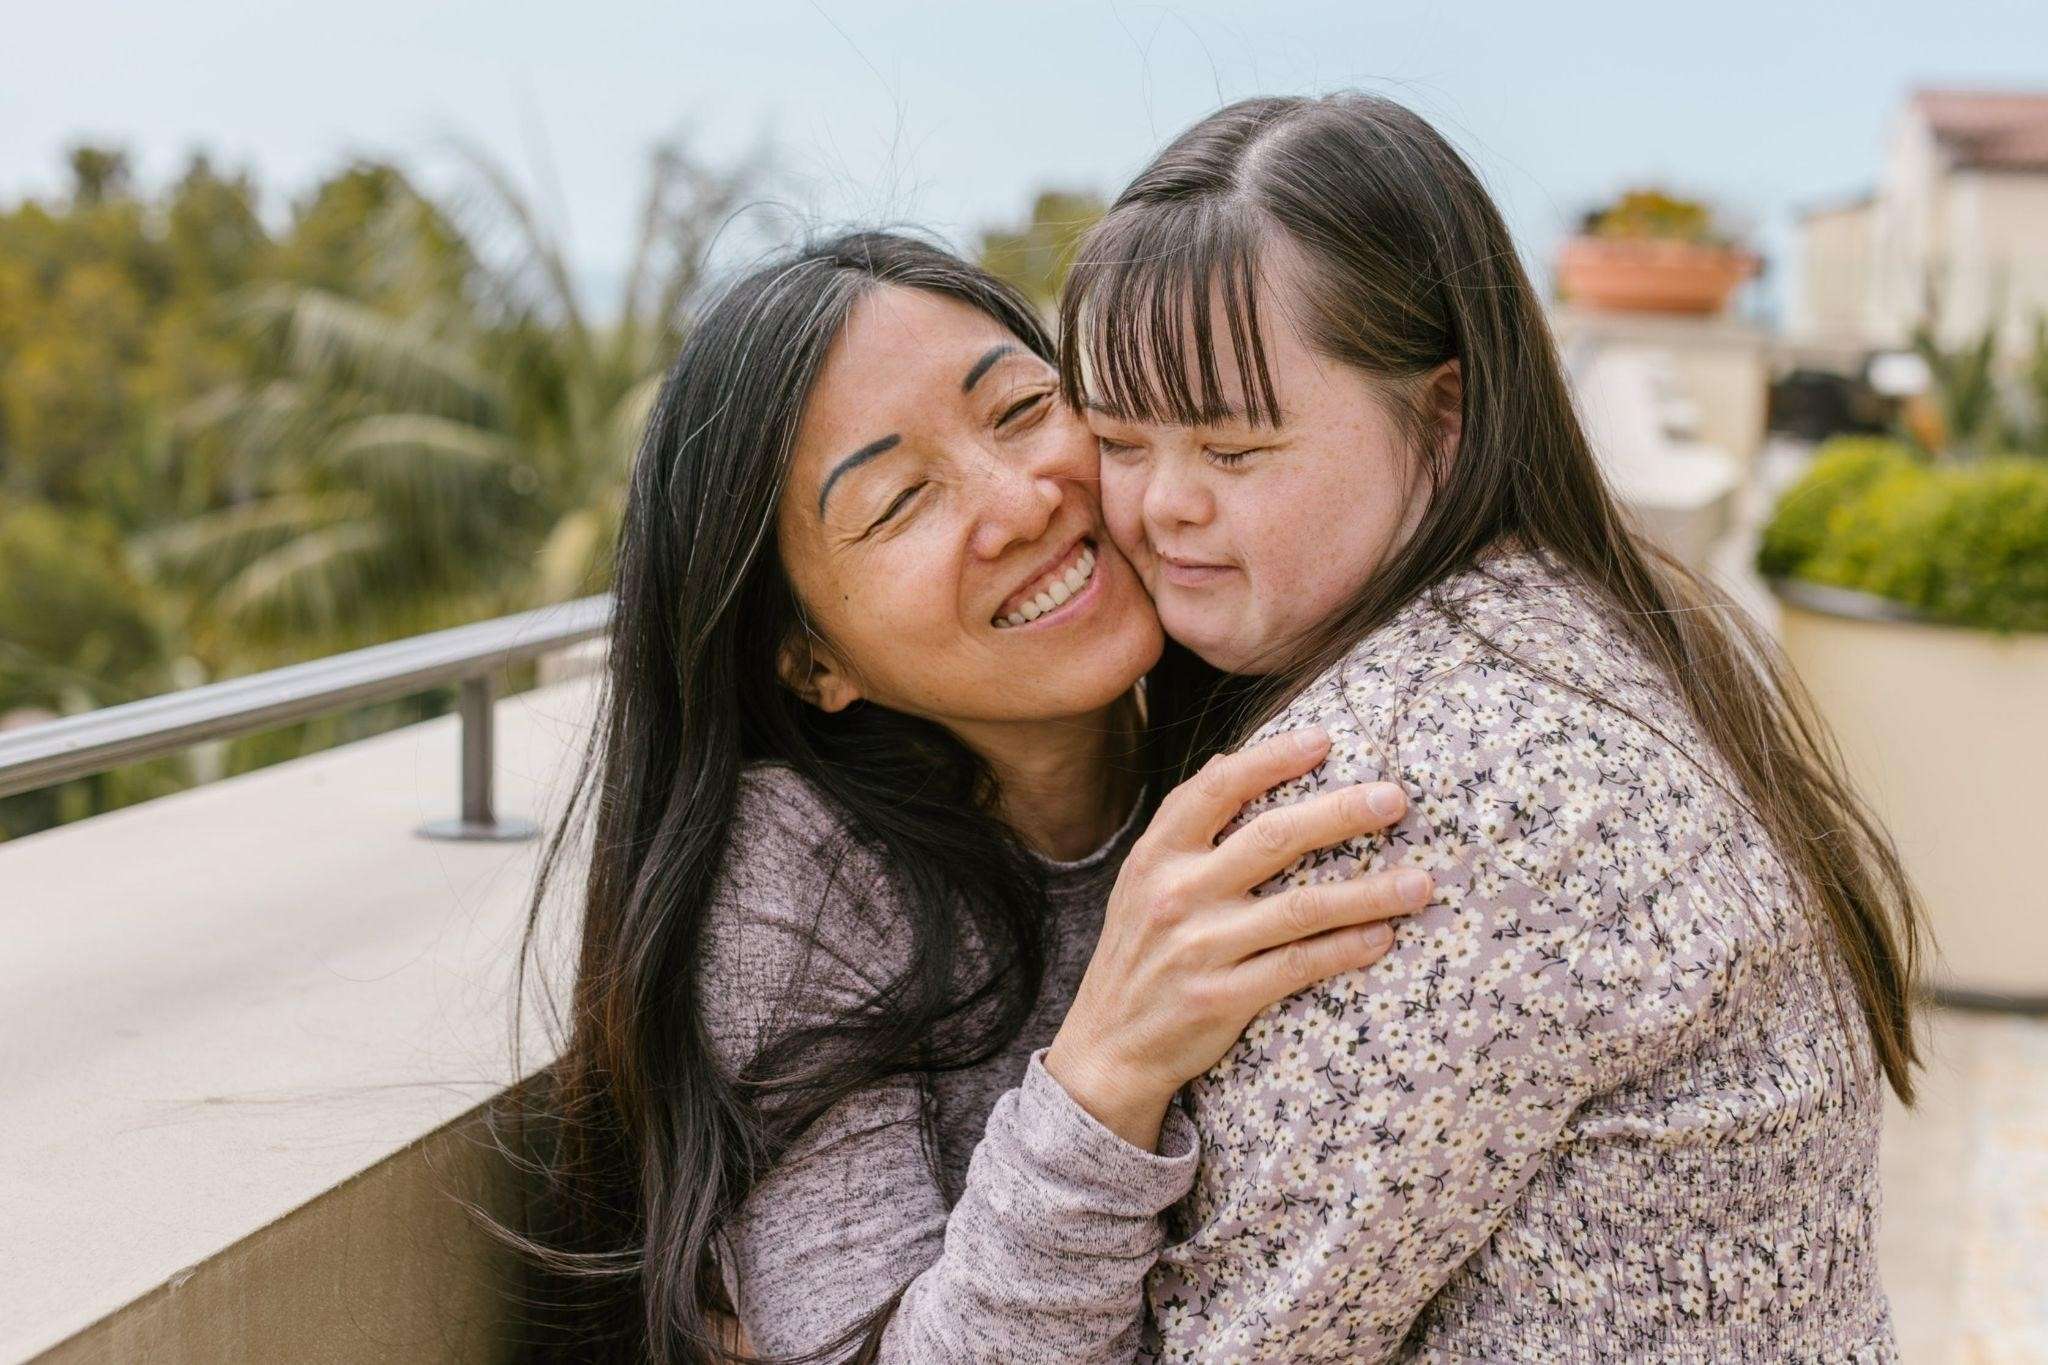 A middle-aged woman smiles and embraces a young woman with down syndrome.